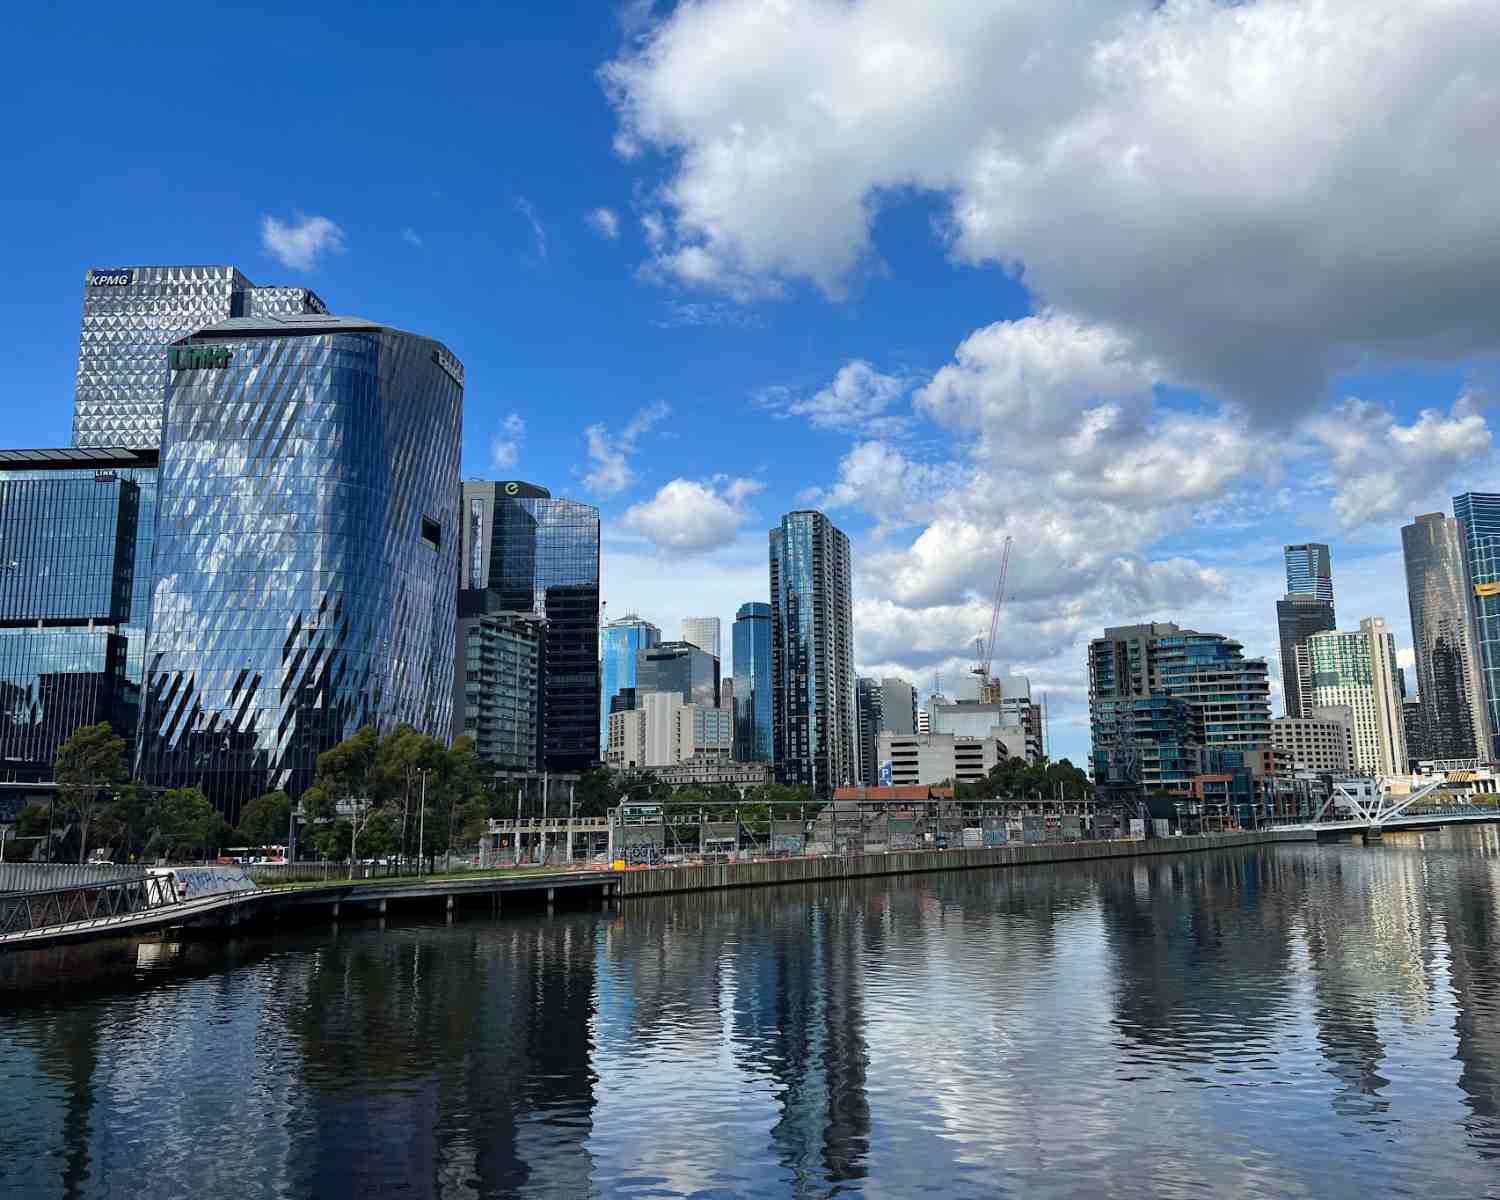 Free Things to Do in Melbourne with Kids